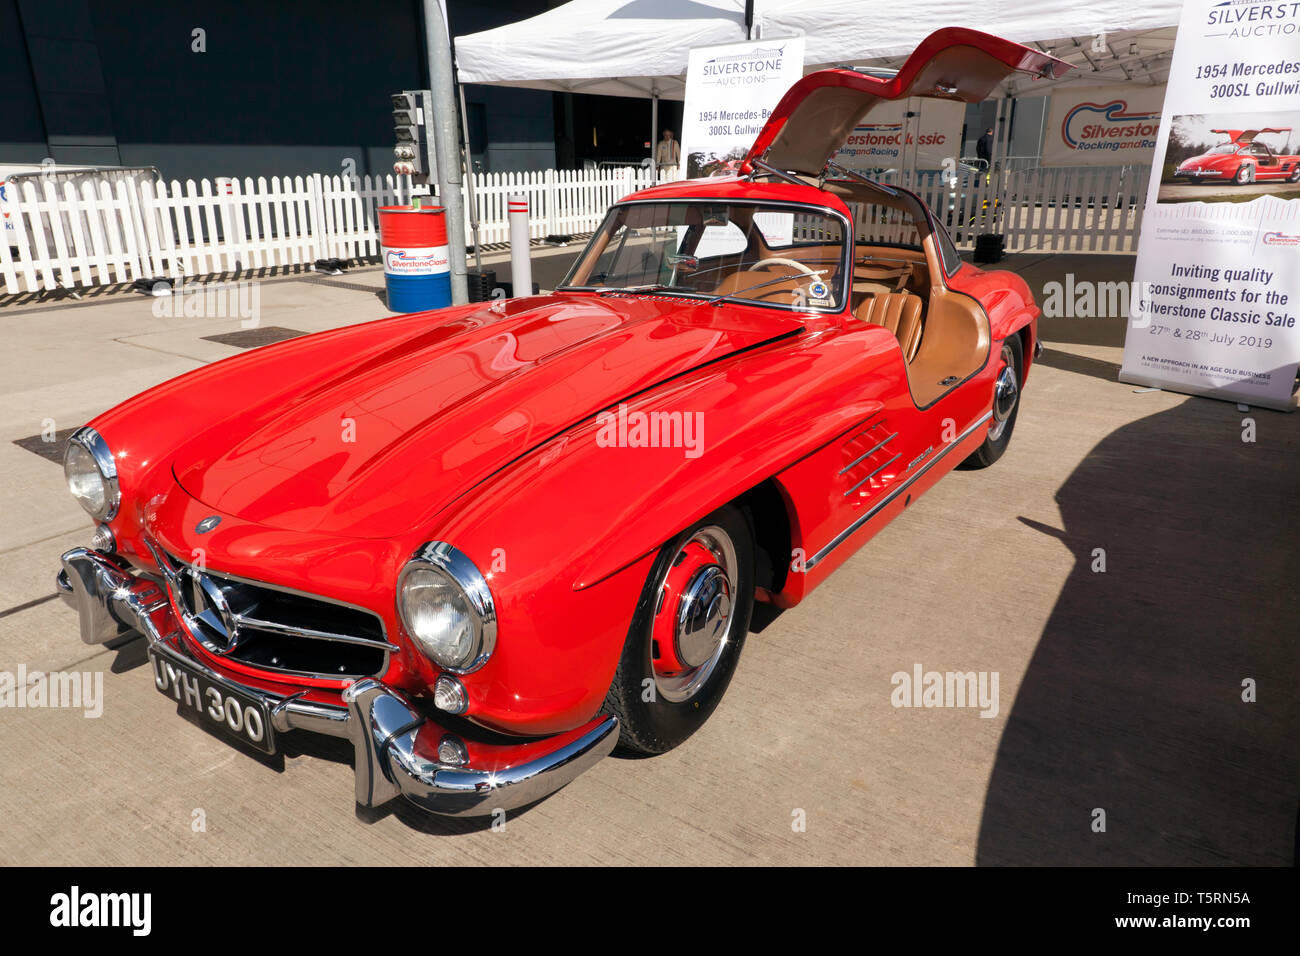 Three-quarter front view of a beautiful red 1954 Mercedes-Benz  300SL Gullwing  which will be for sale in the 2029 Silverstone Classic Car Auction Stock Photo